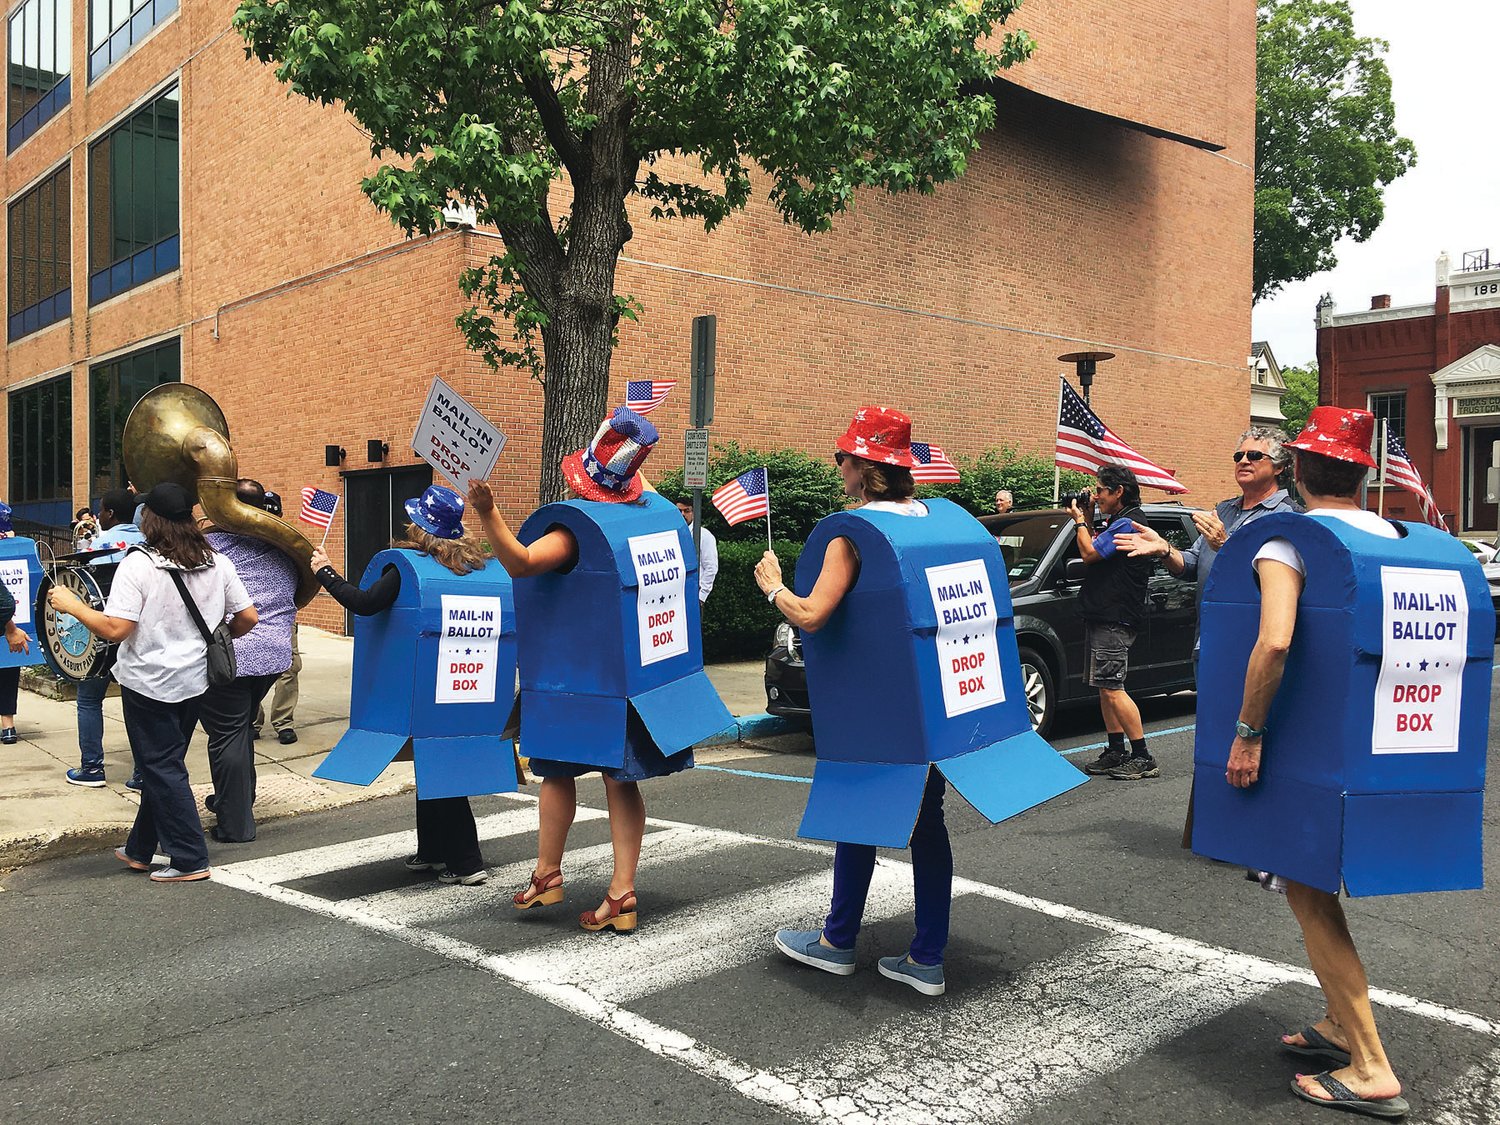 Members of Bucks Voices dance their way to the former Bucks County Courthouse to call for more drop boxes in Bucks County.